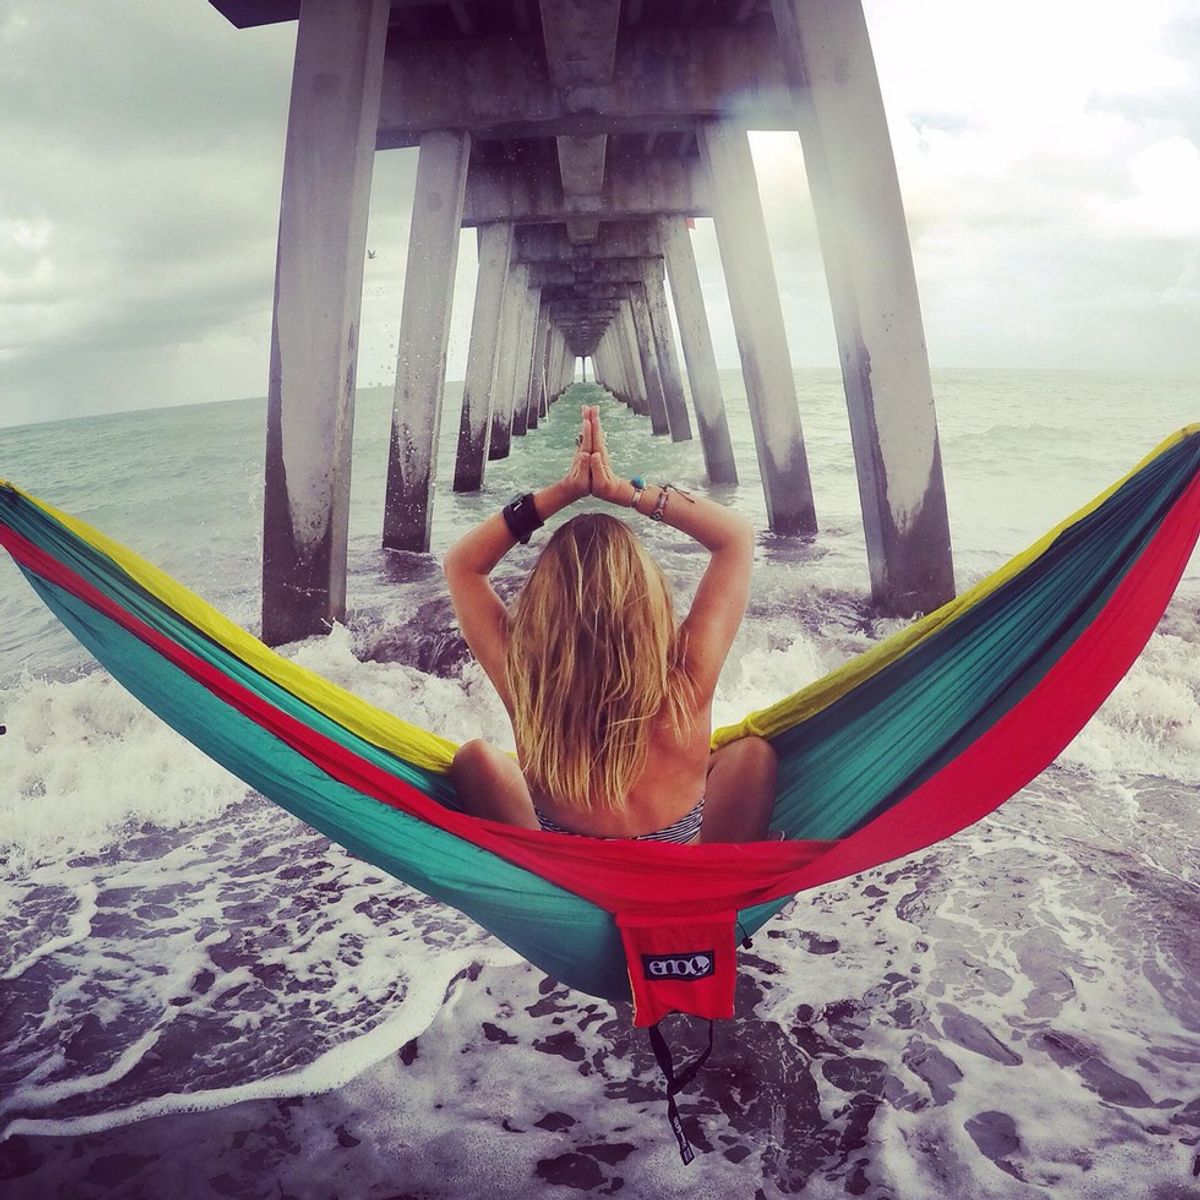 5 Reasons Why You Should Invest In An ENO Hammock